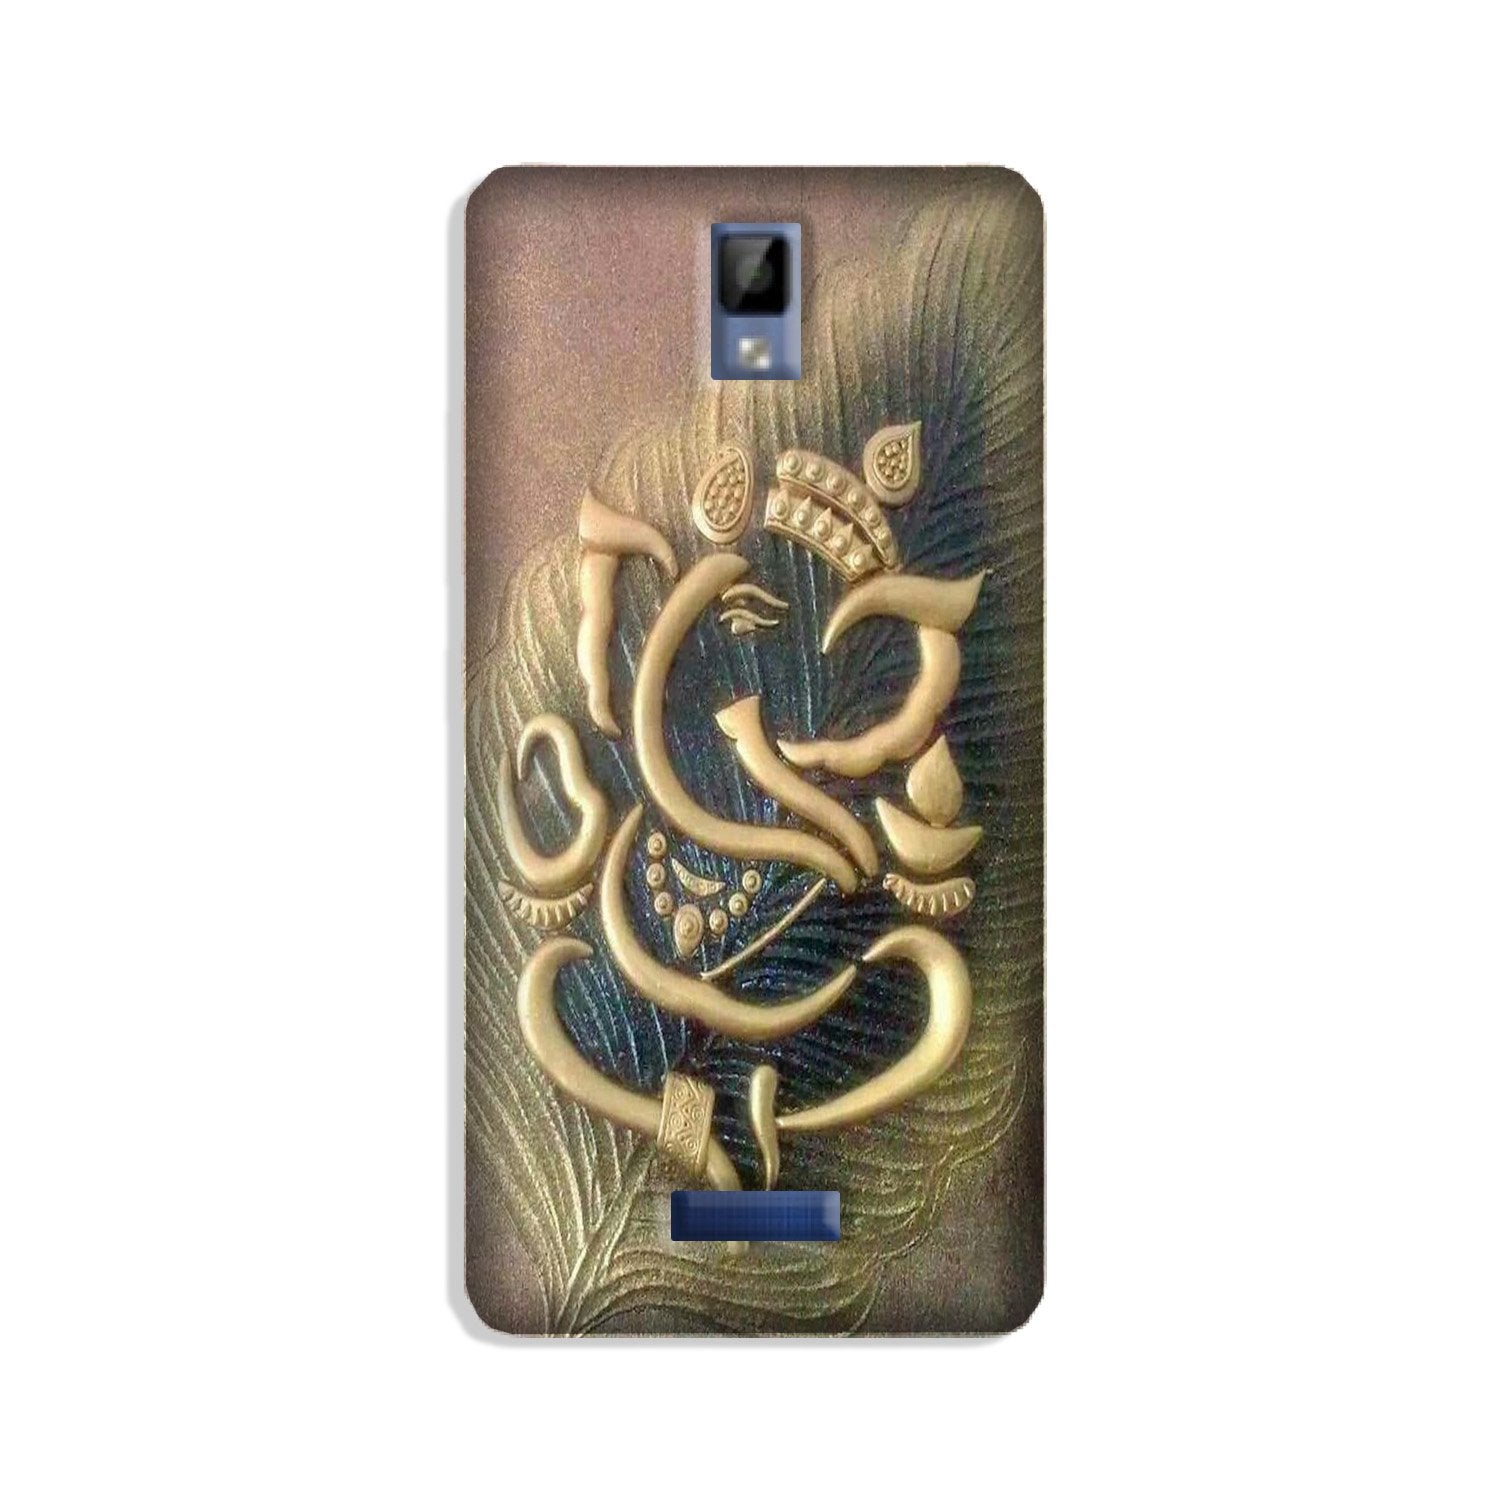 Lord Ganesha Case for Gionee P7